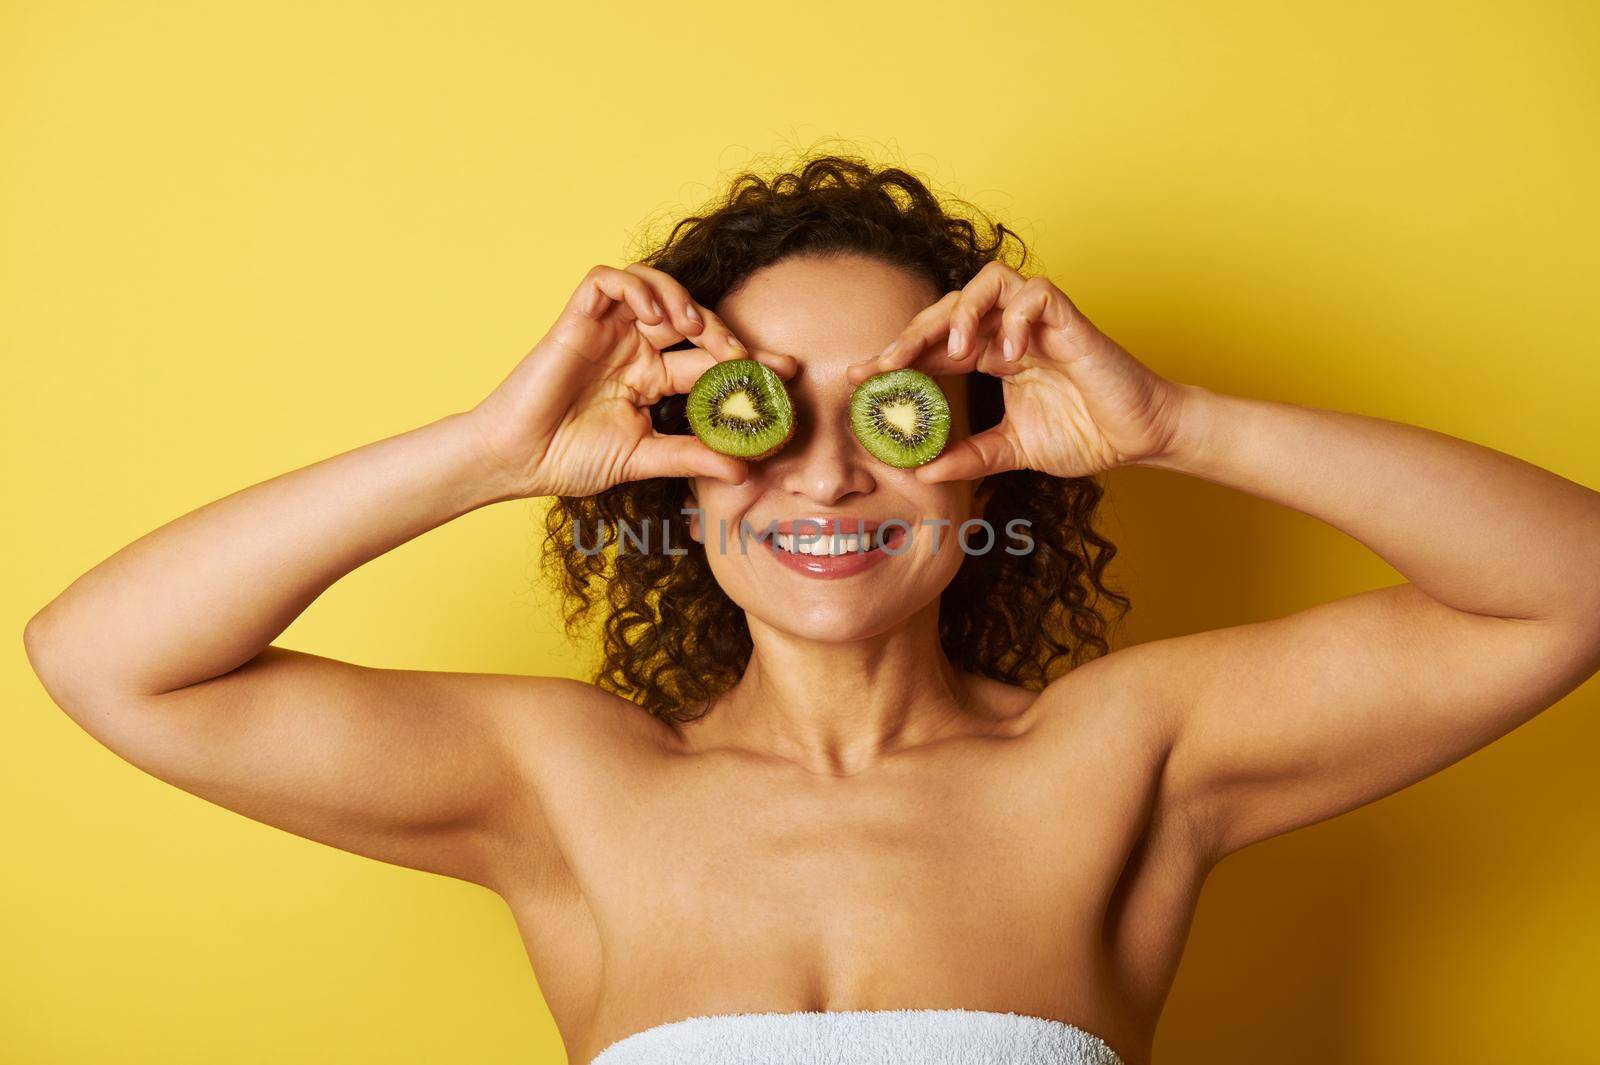 Smiling mixed race muscular woman covering her eyes with kiwi halves, smiling while posing against yellow background by artgf